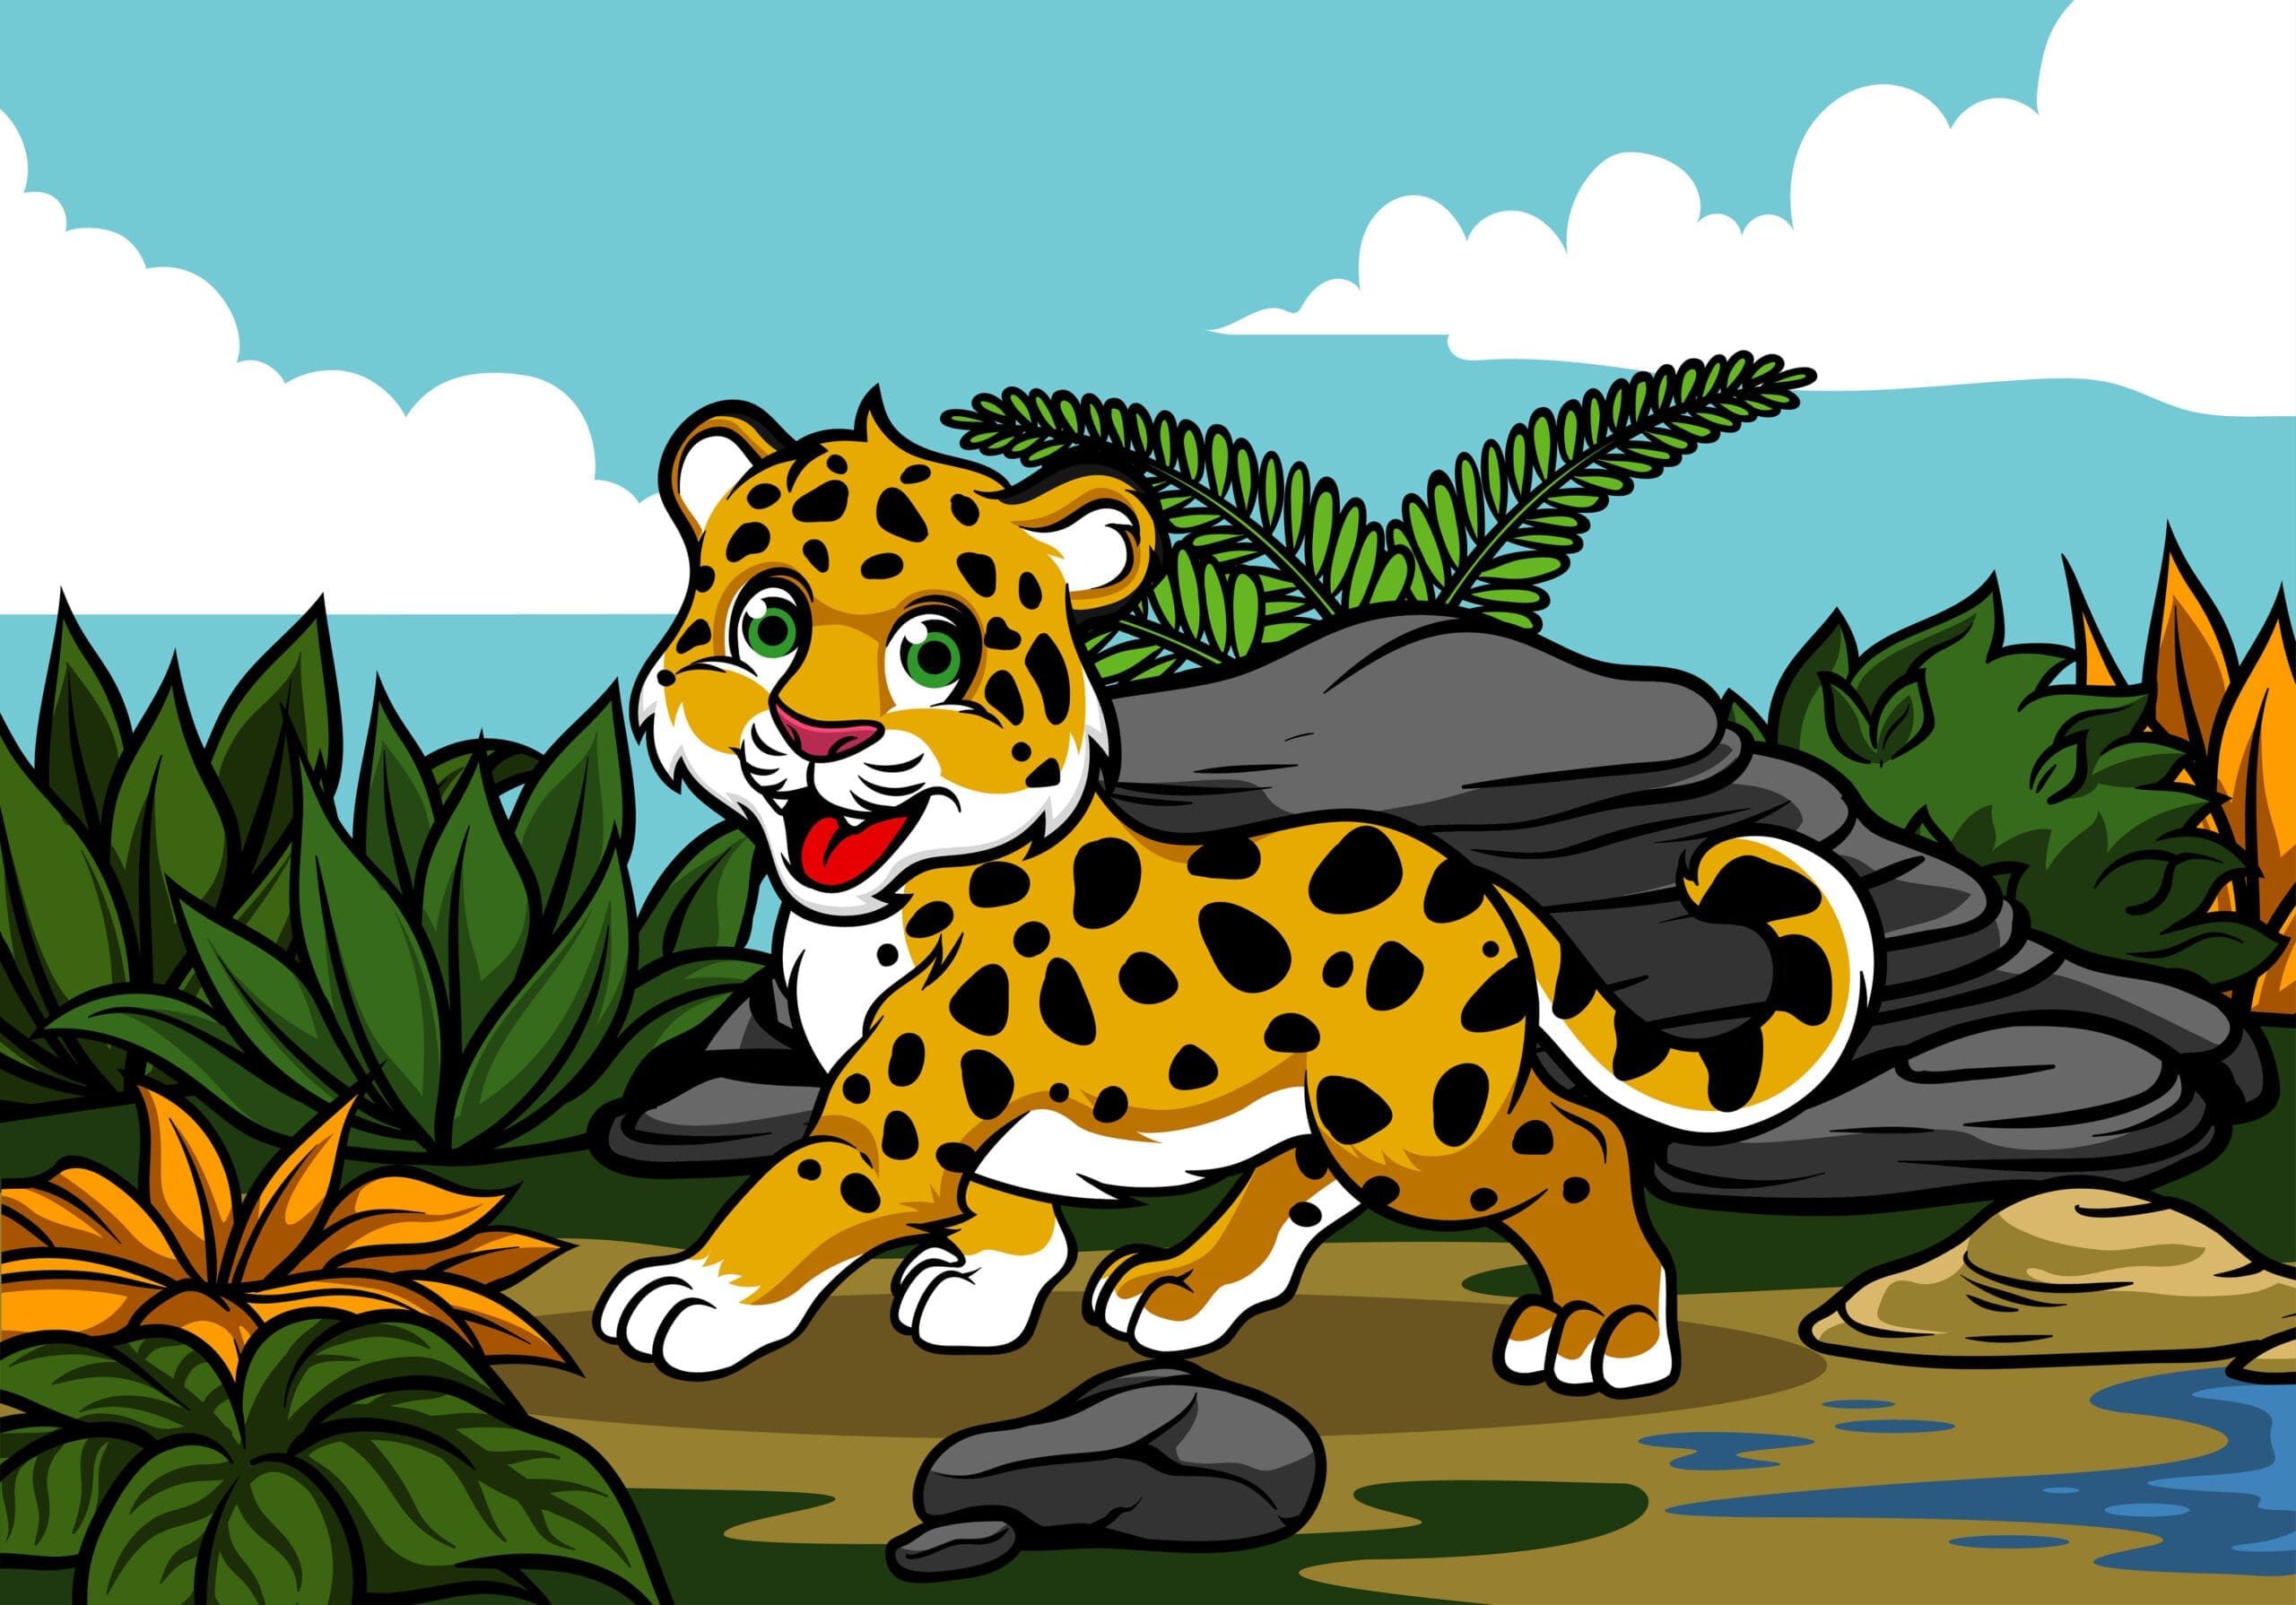 Cartoon graphic of two cheerful leopards waving goodbye with their spotted tails held high.